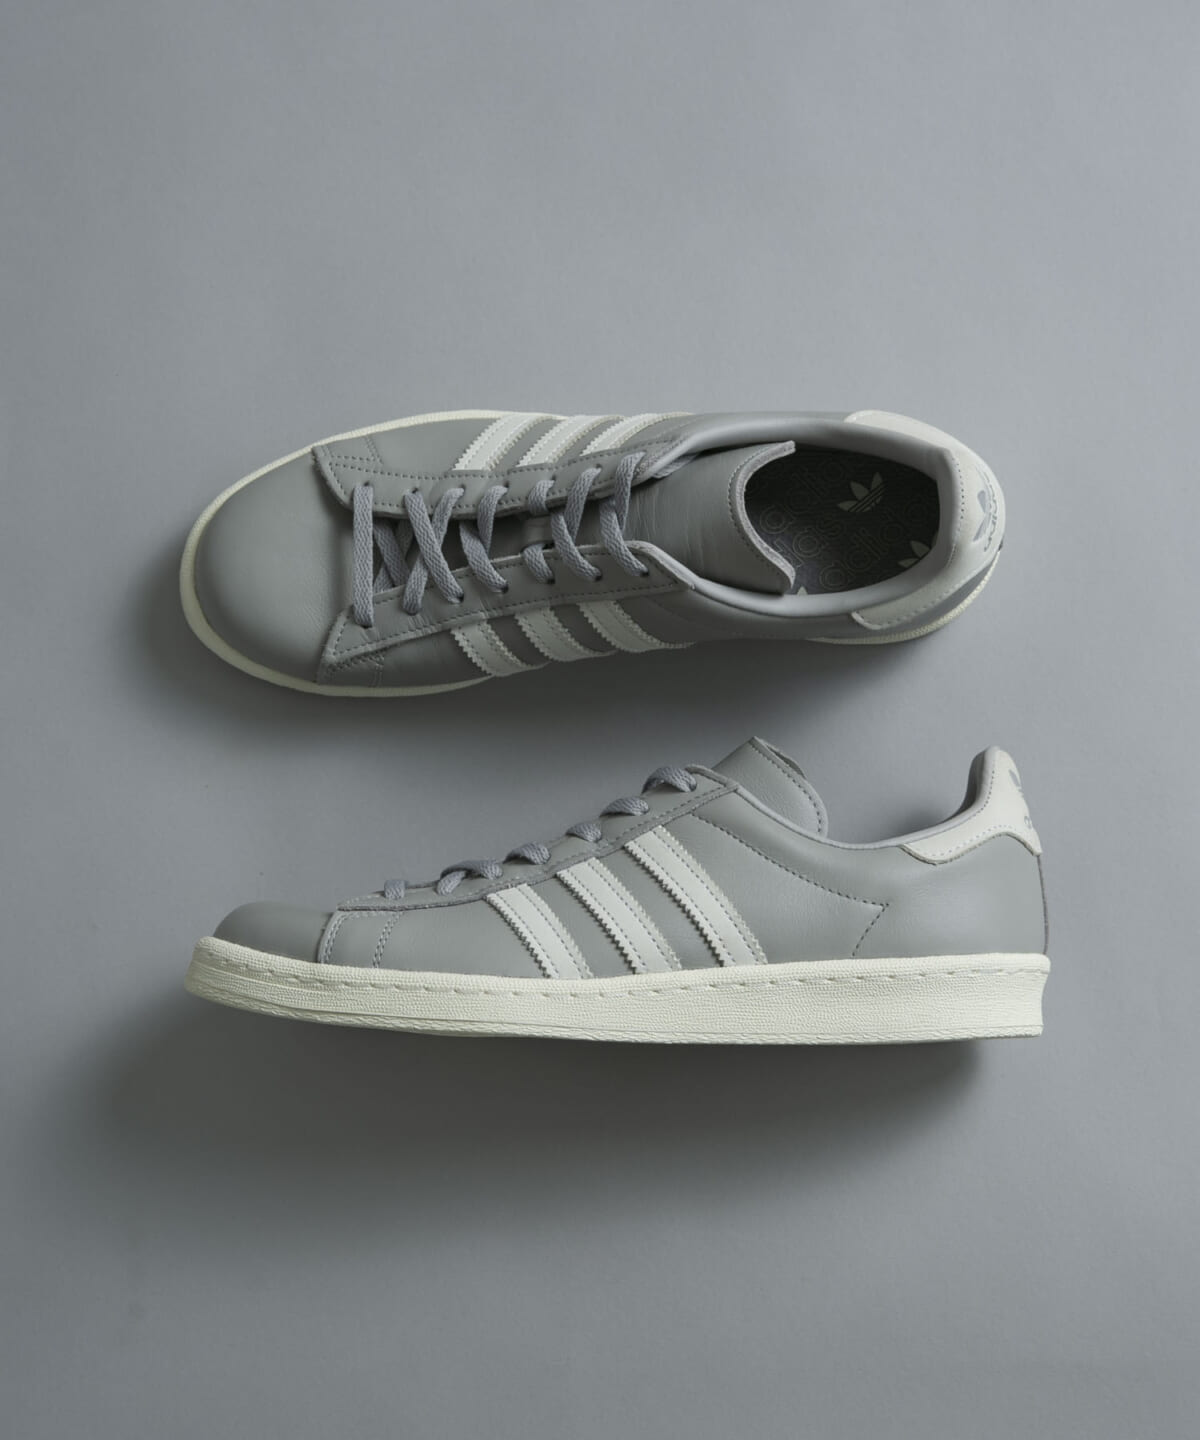 Bespoke models with adidas Originals Urban and Urban Research Doors are now available! | GetNavi web GetNavi -